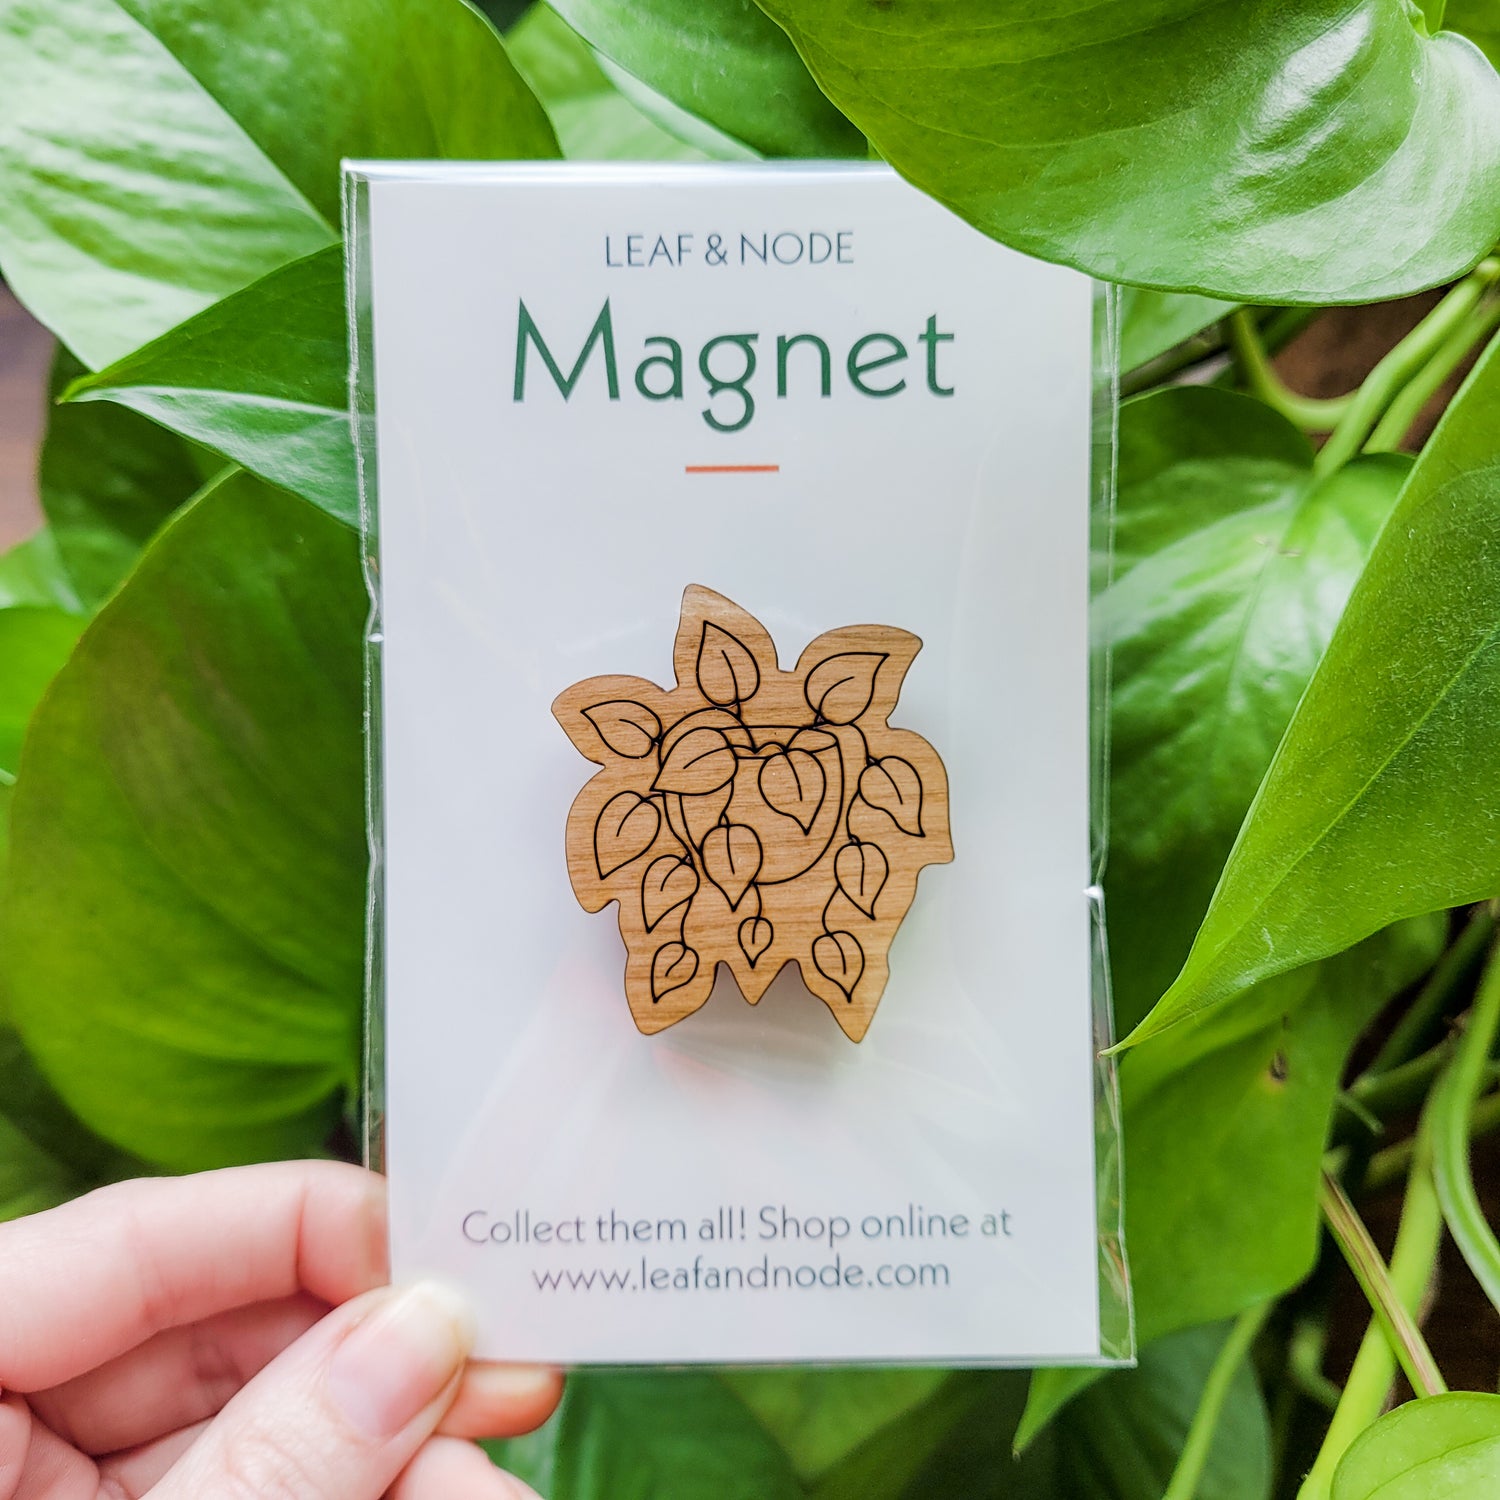 Handcrafted magnet featuring a pothos or heartleaf philodendron plant engraved in cherry wood held against a plant in product packaging.